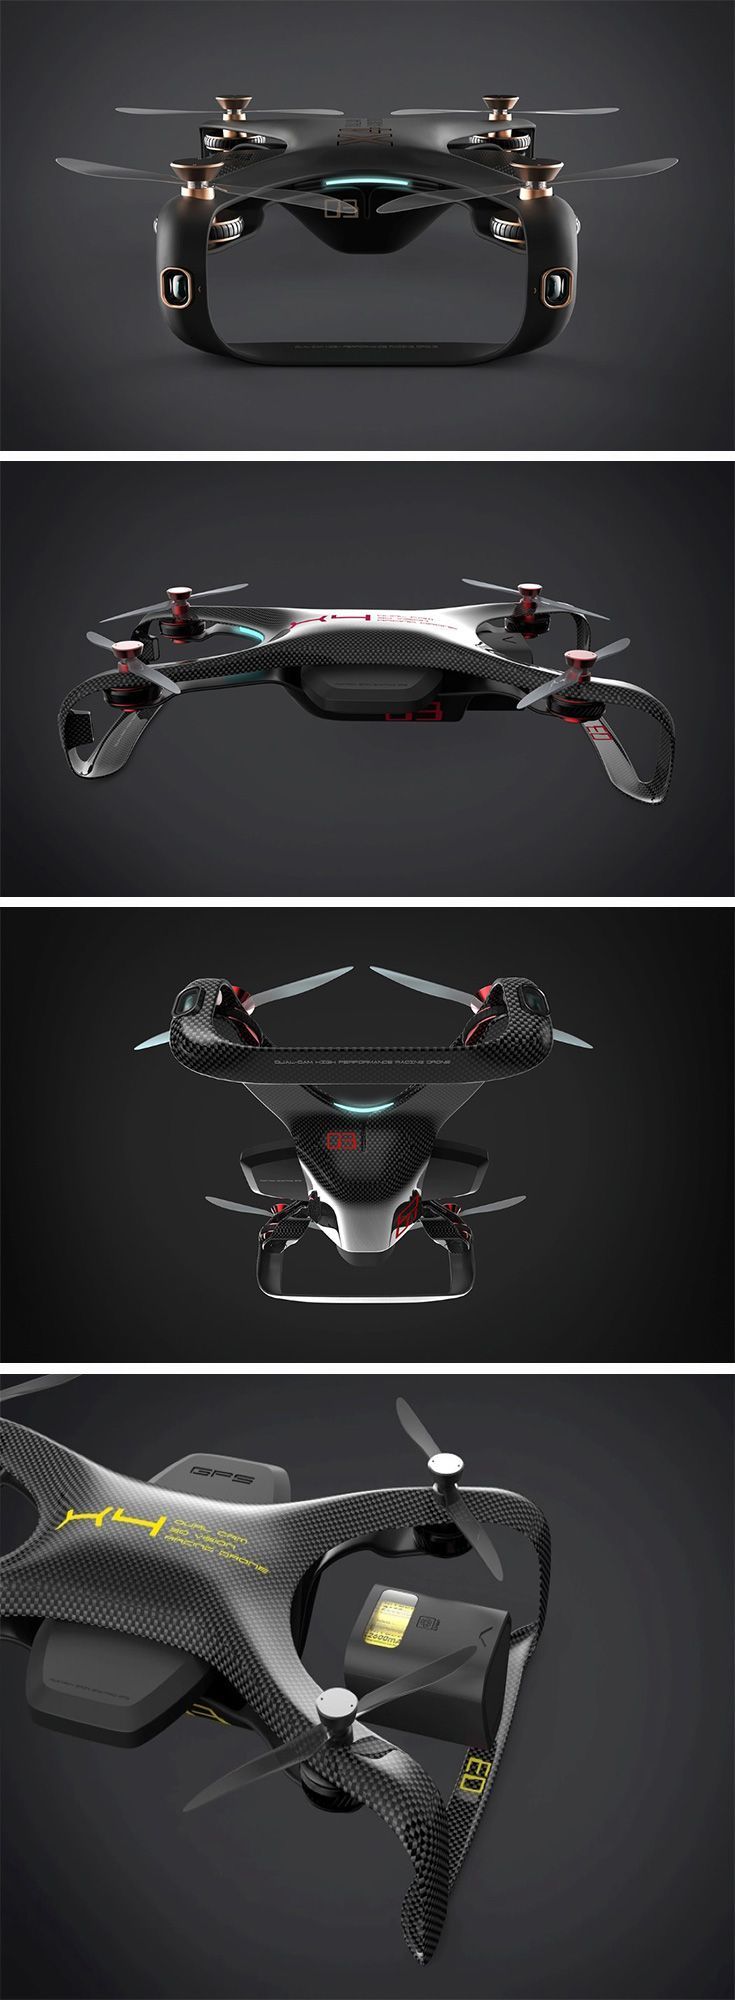 The Racing Drone concept is all about looking badass, and slicing through the ai...